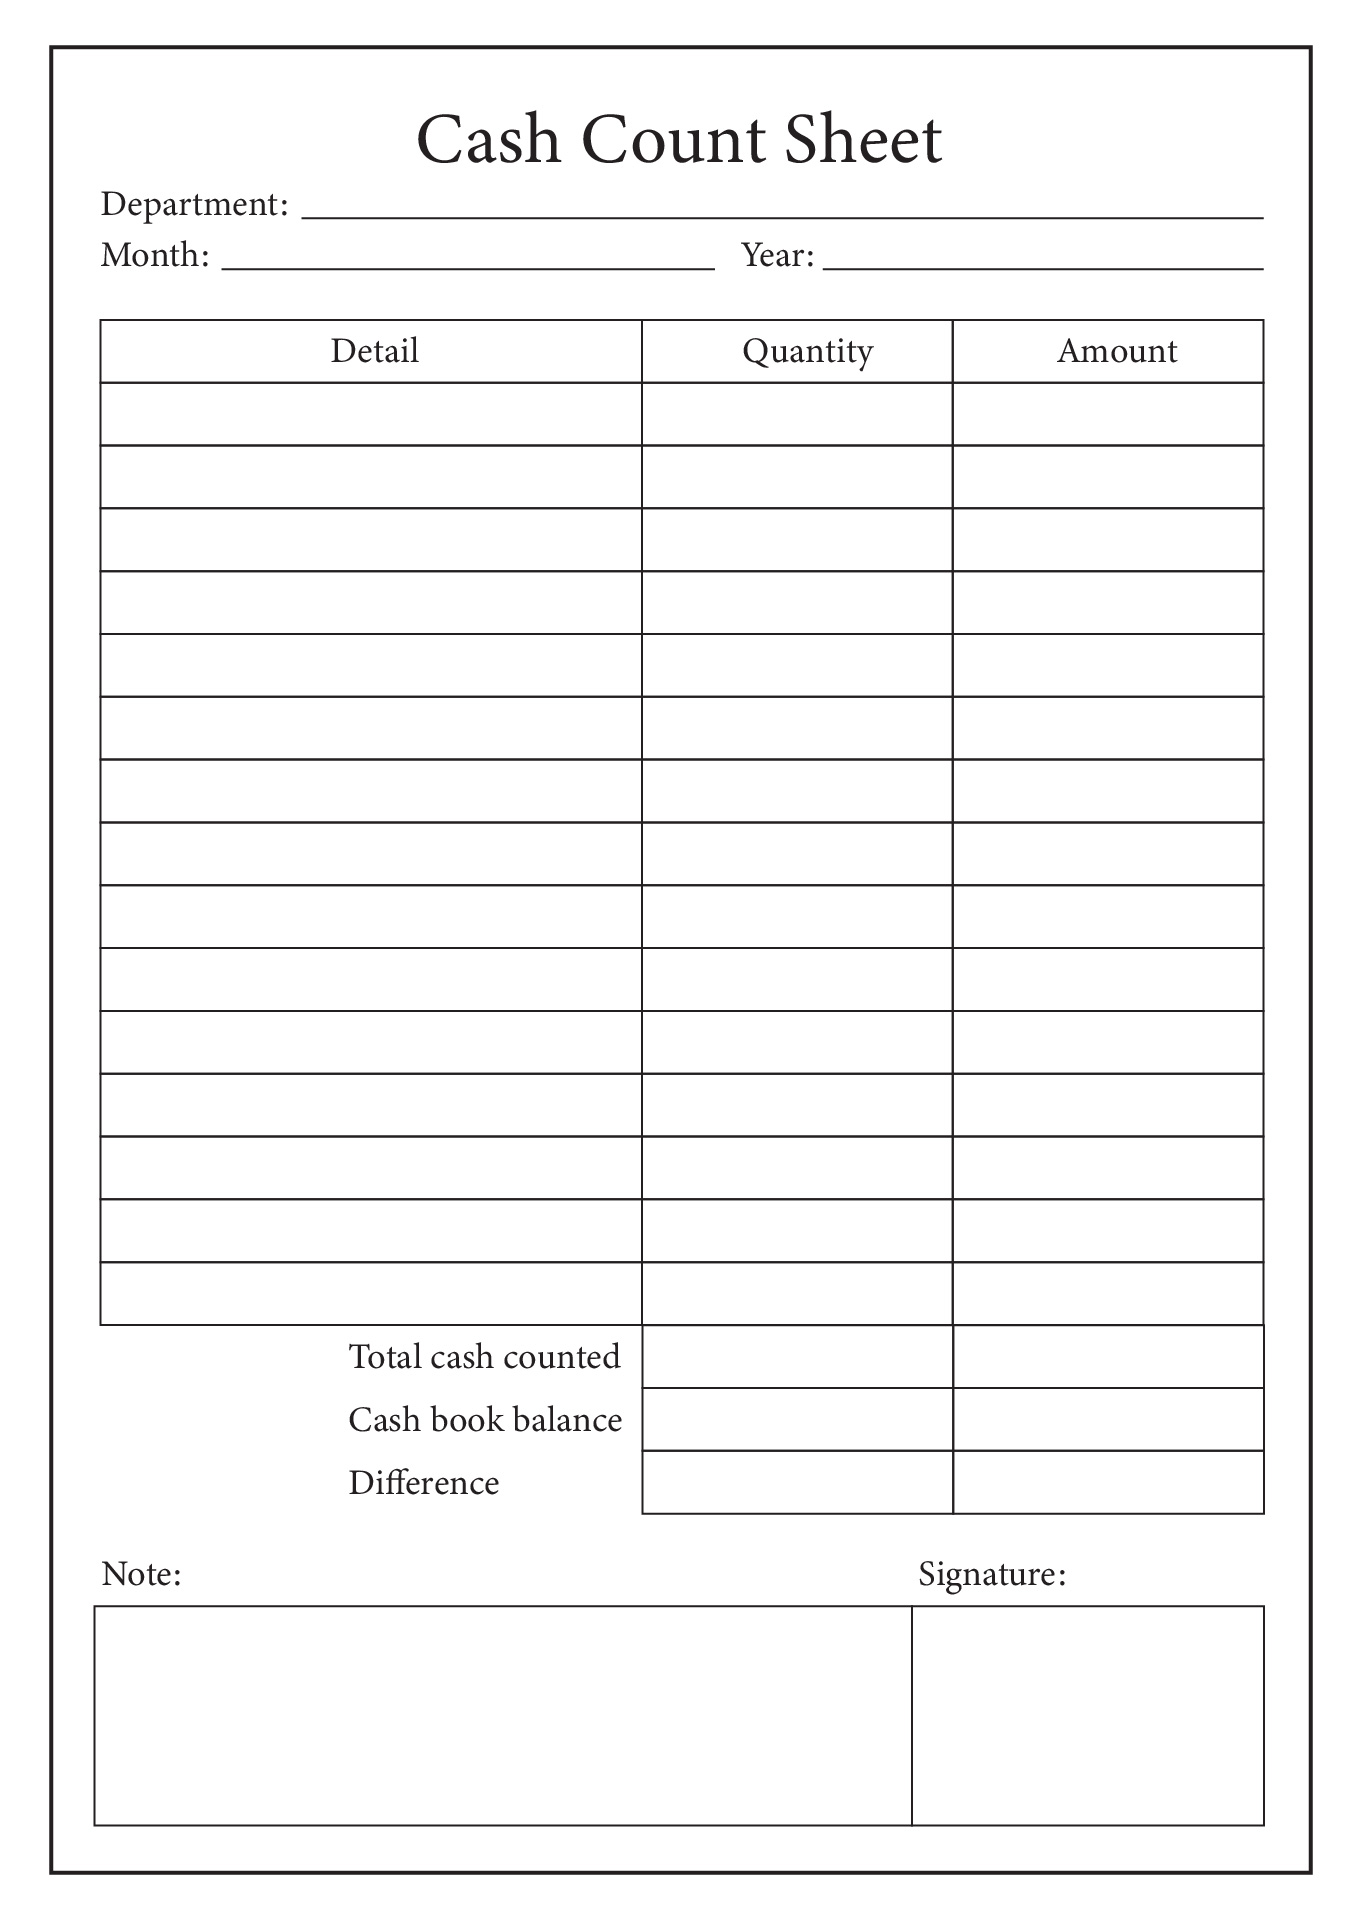 Cash Drawer Count Sheet Template Free Printable Templates